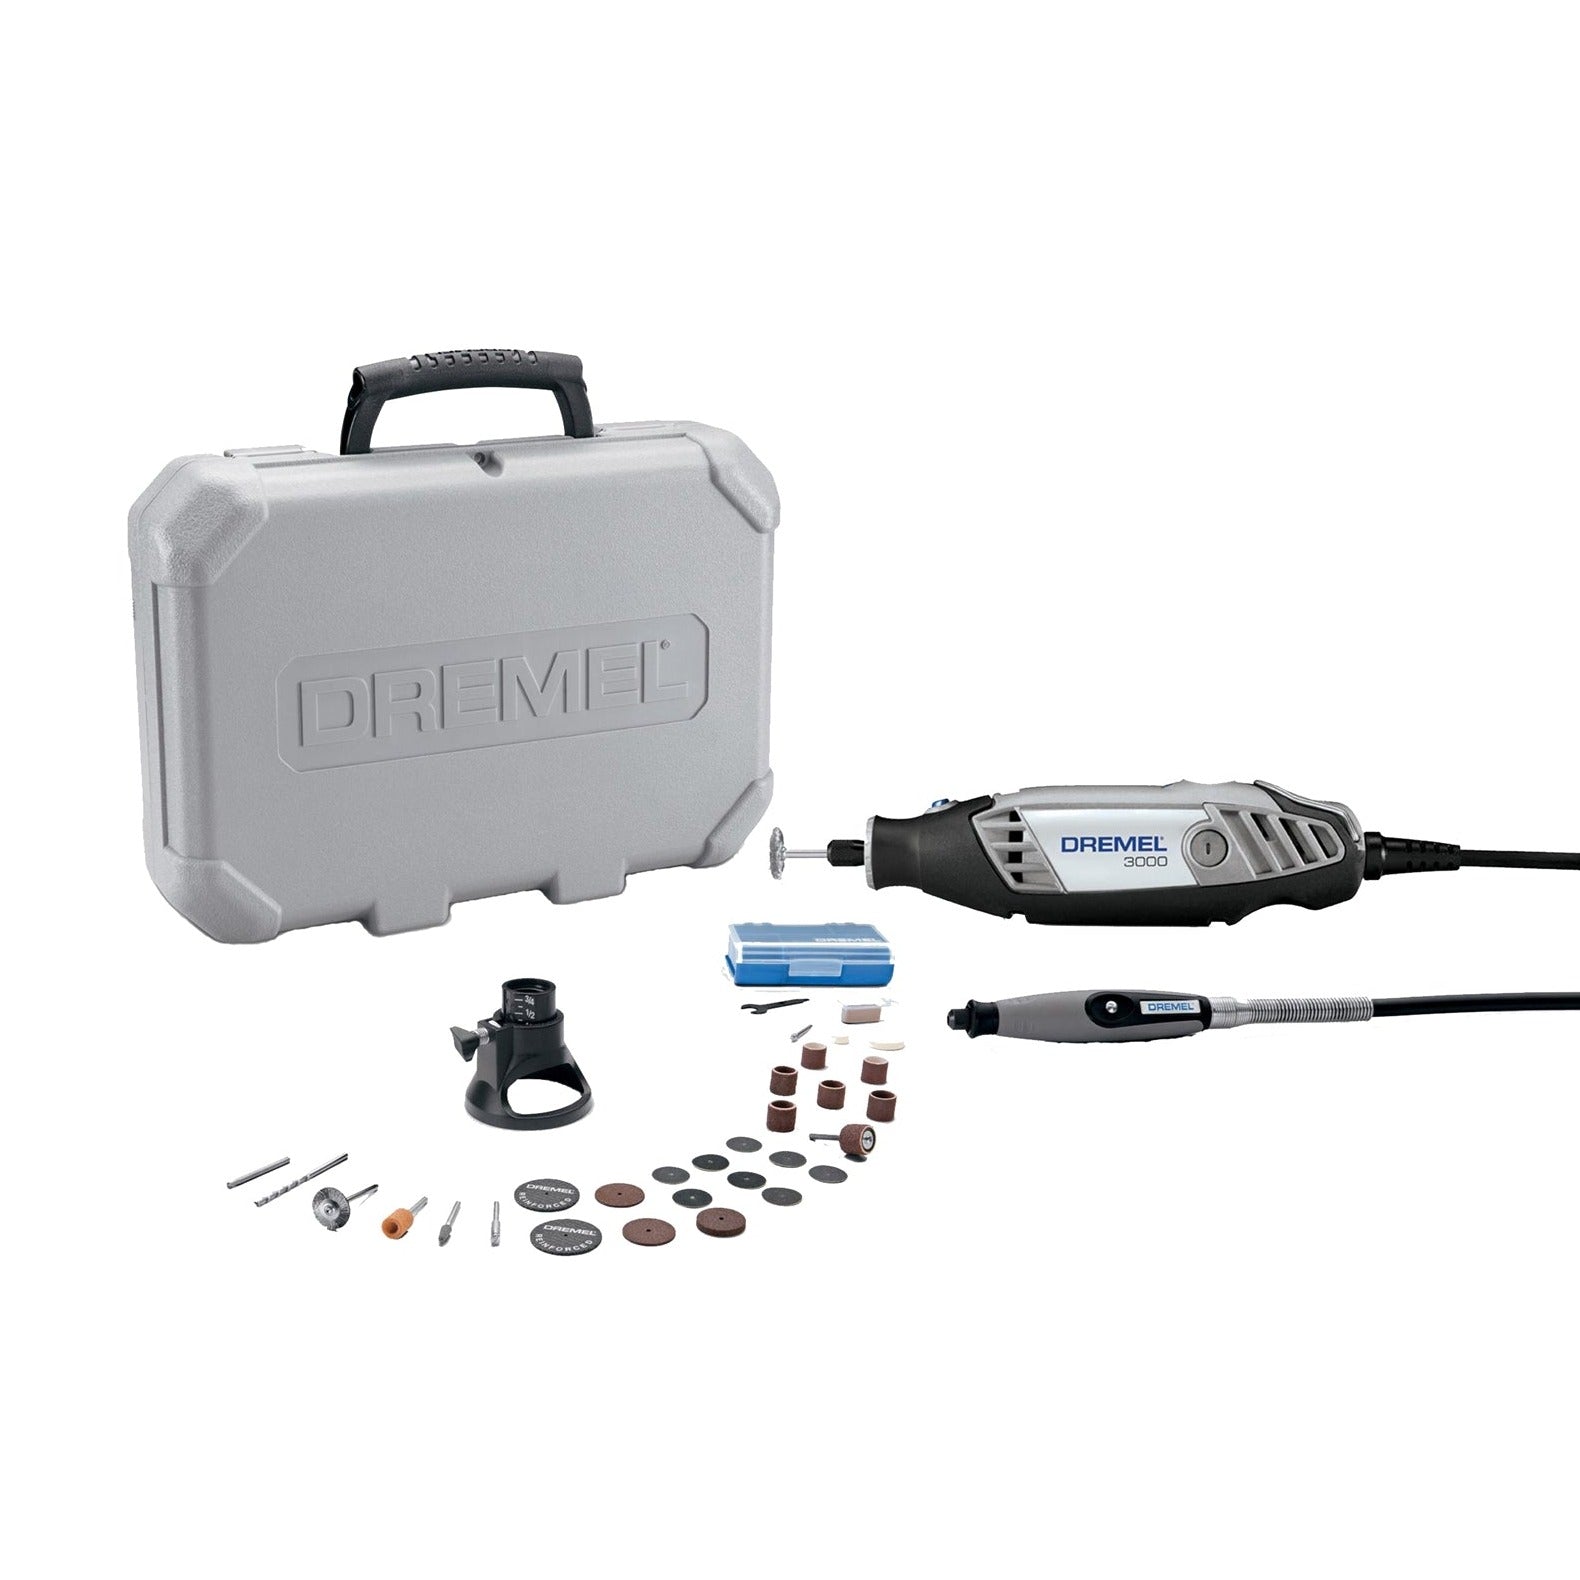 Dremel 3000 Series Rotary Tool Kit with 2 Attachments + 30Pce Accessory Set 3000-2/30 by Dremel